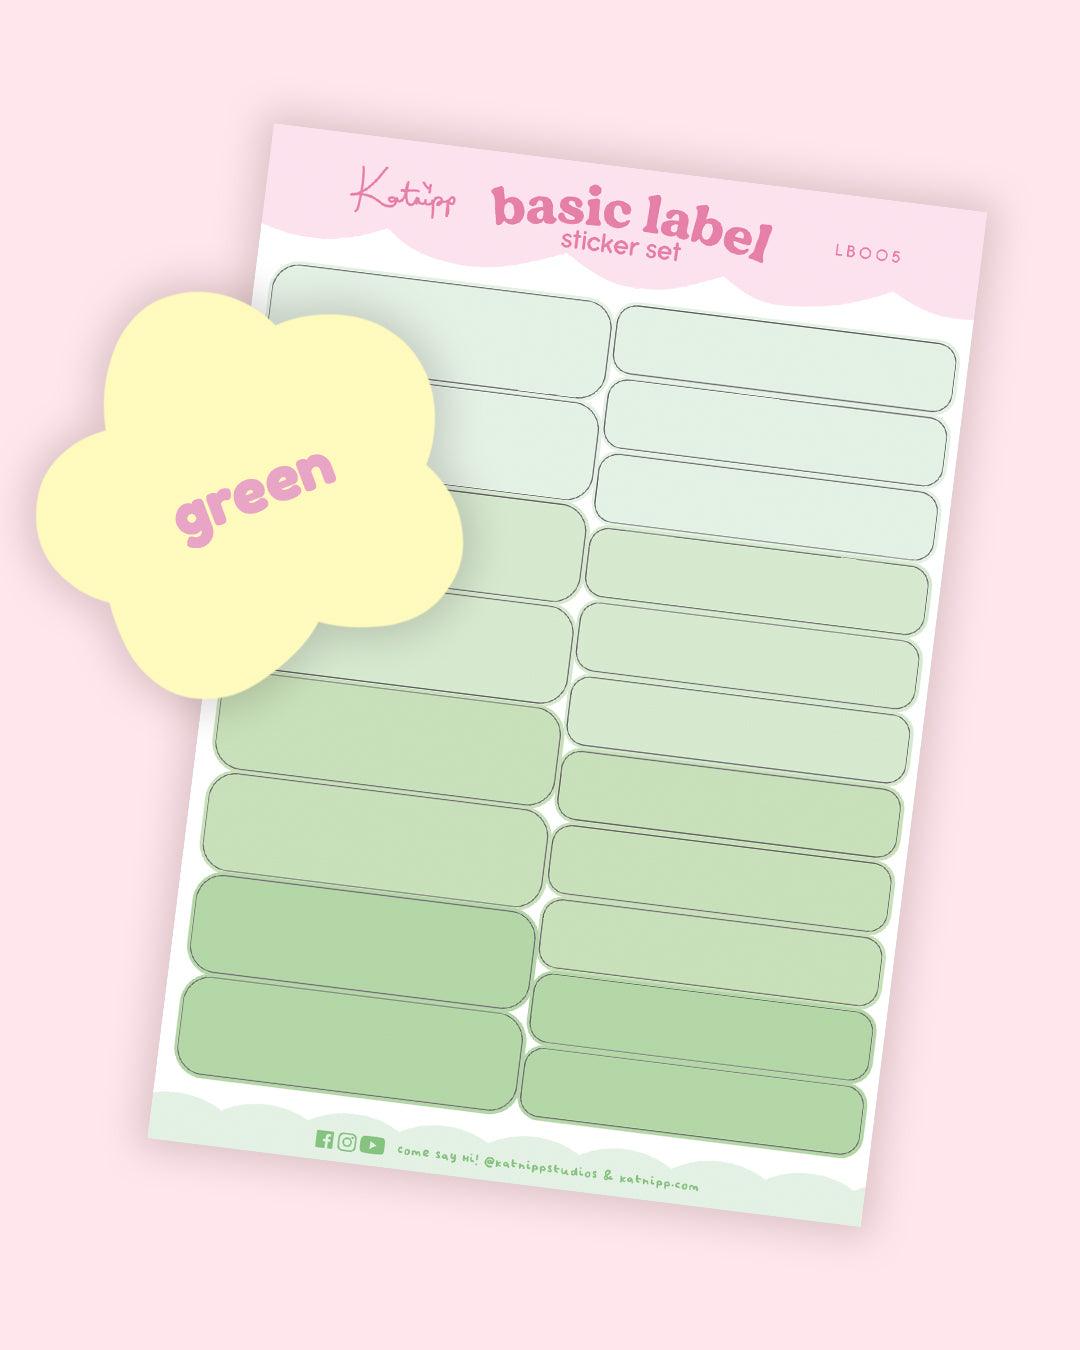 Charming Organisation Label Stickers with vibrant designs, ideal for decluttering and categorising your space. 6